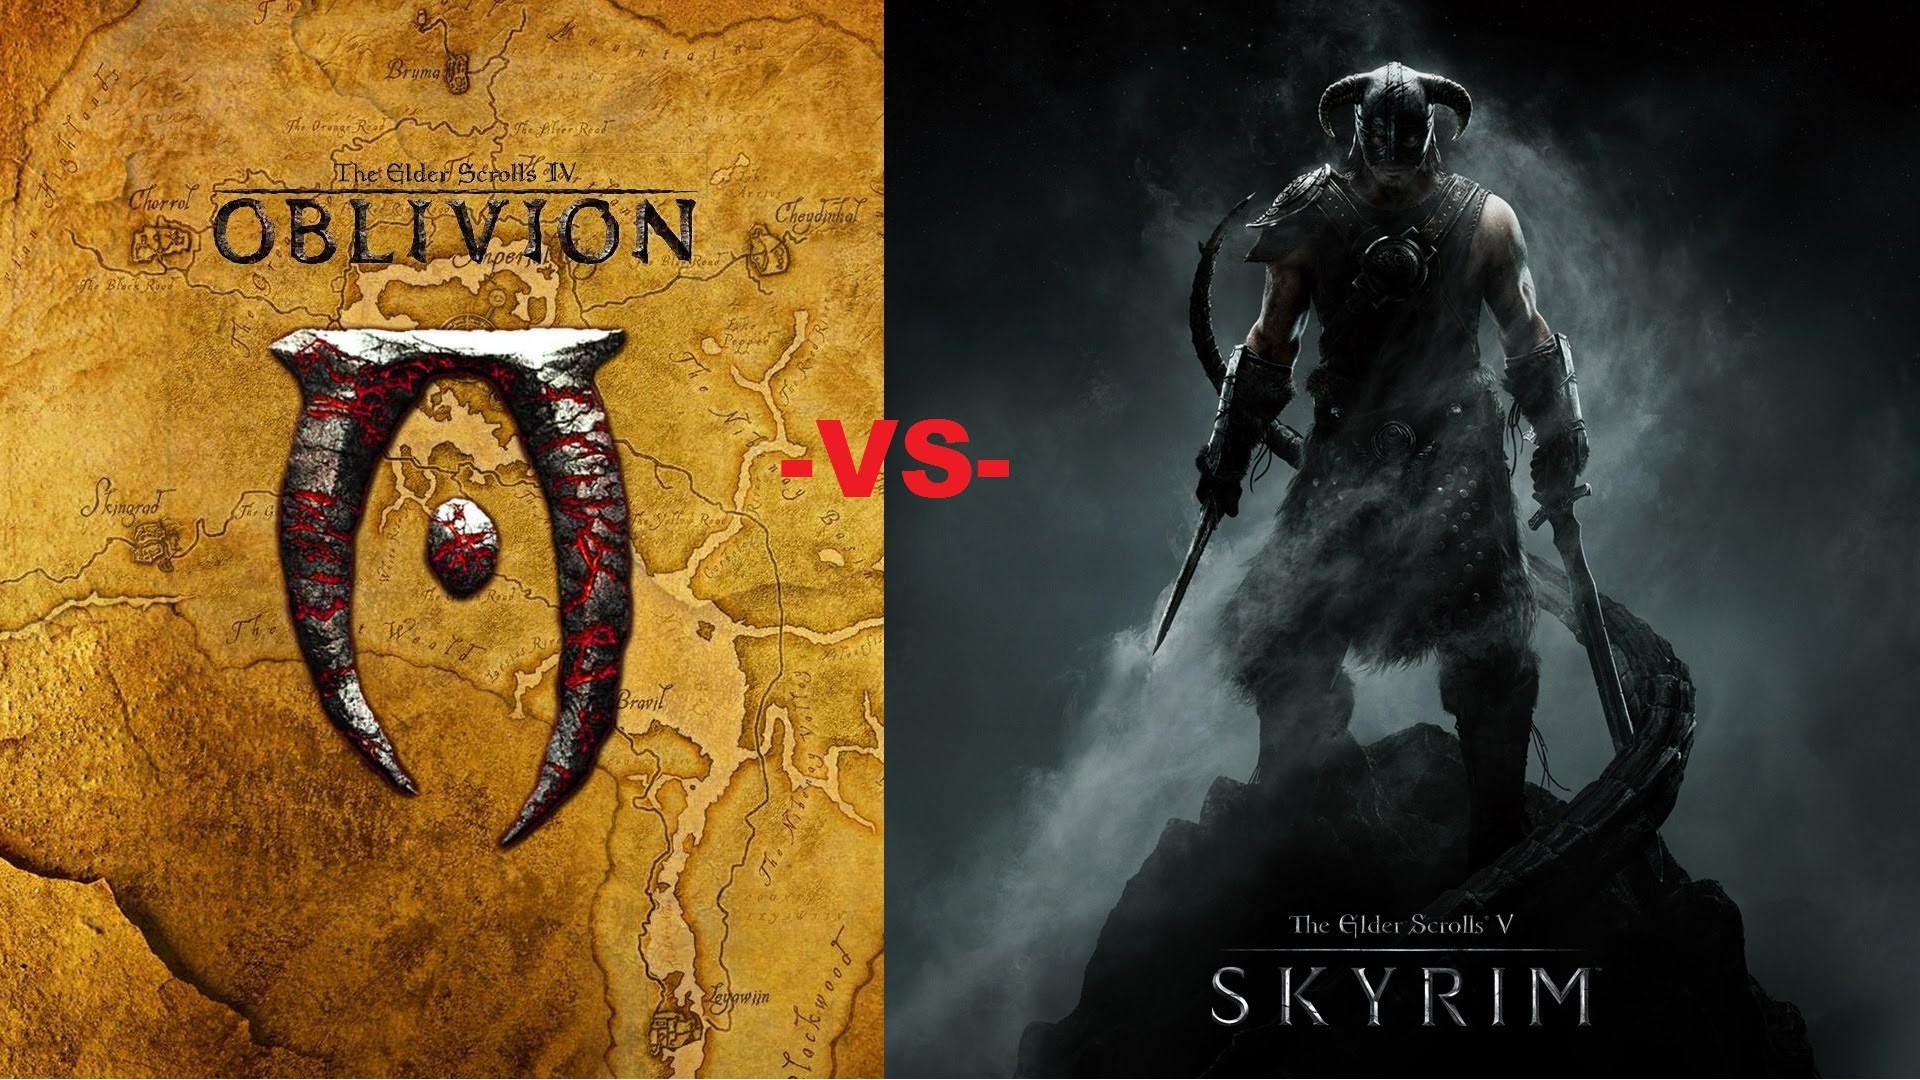 Oblivion or Skyrim - which game is better?